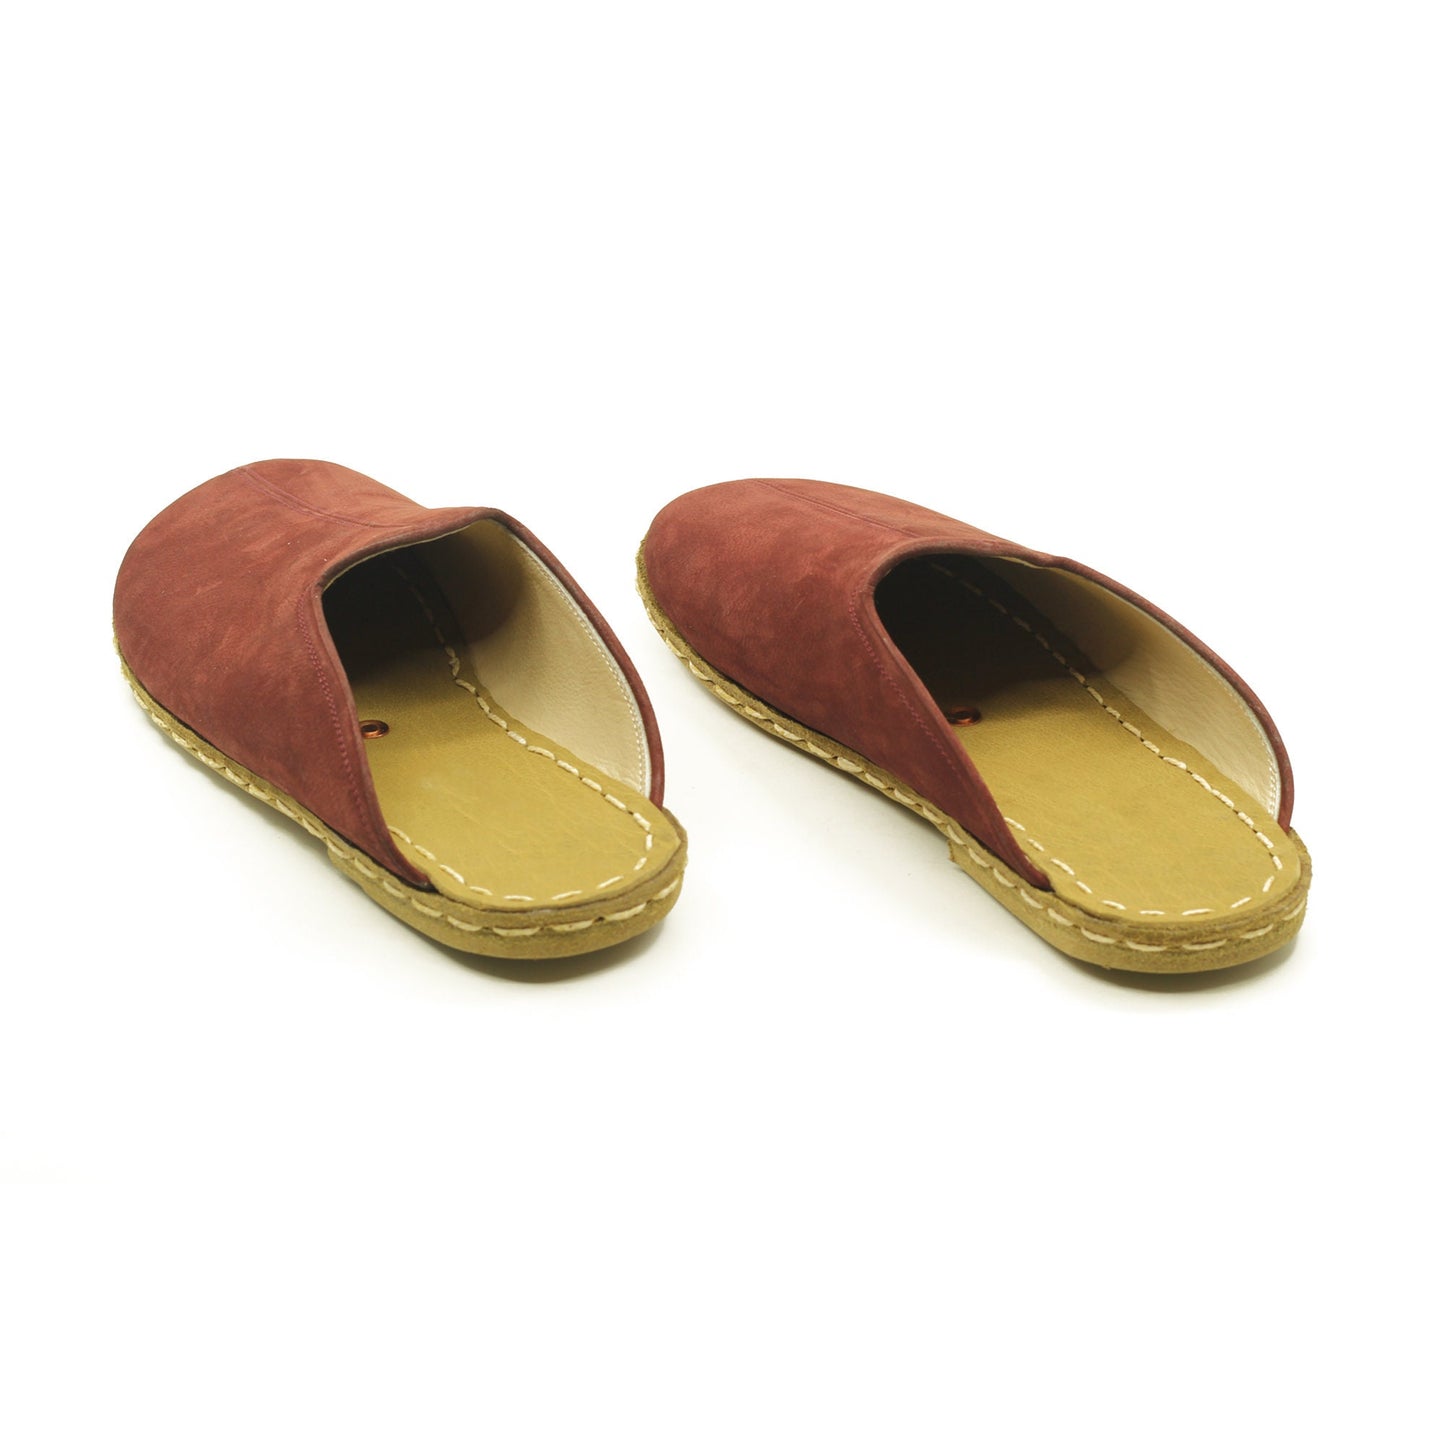 House Wear Slippers For Ladies Handmade Barefoot - Nefes Shoes